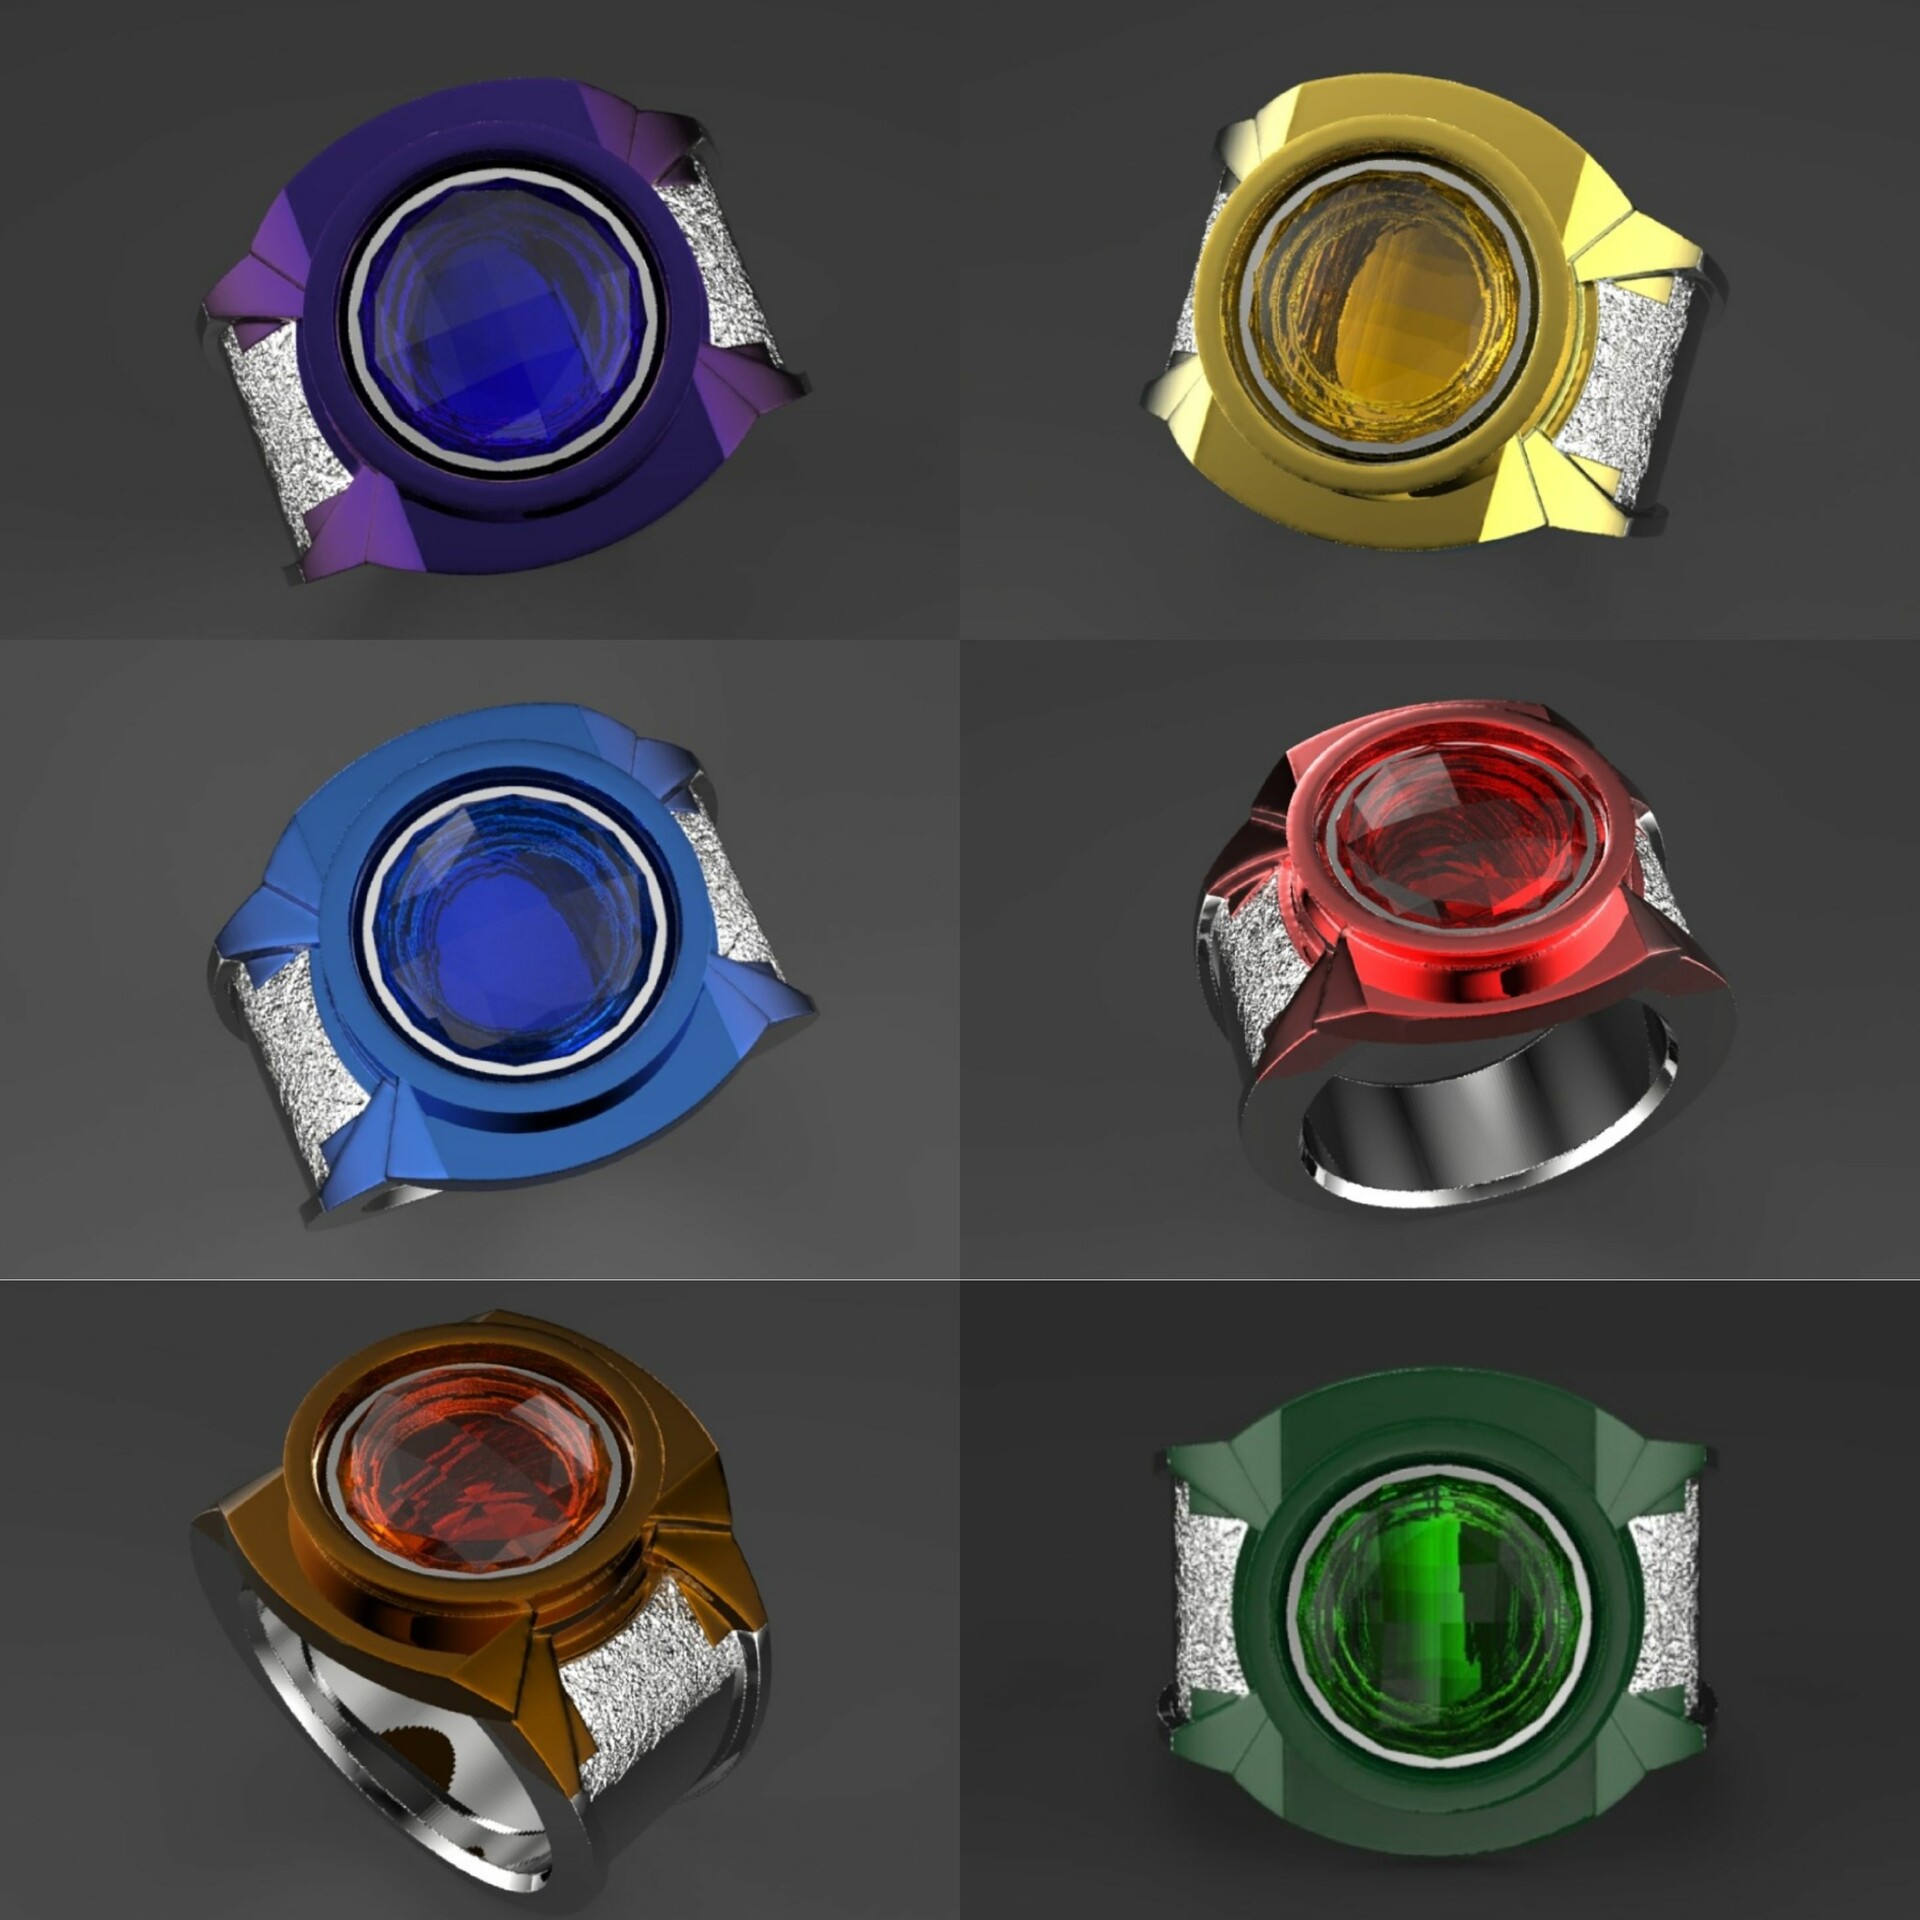 From Green to Yellow: The abilities of every power ring explained